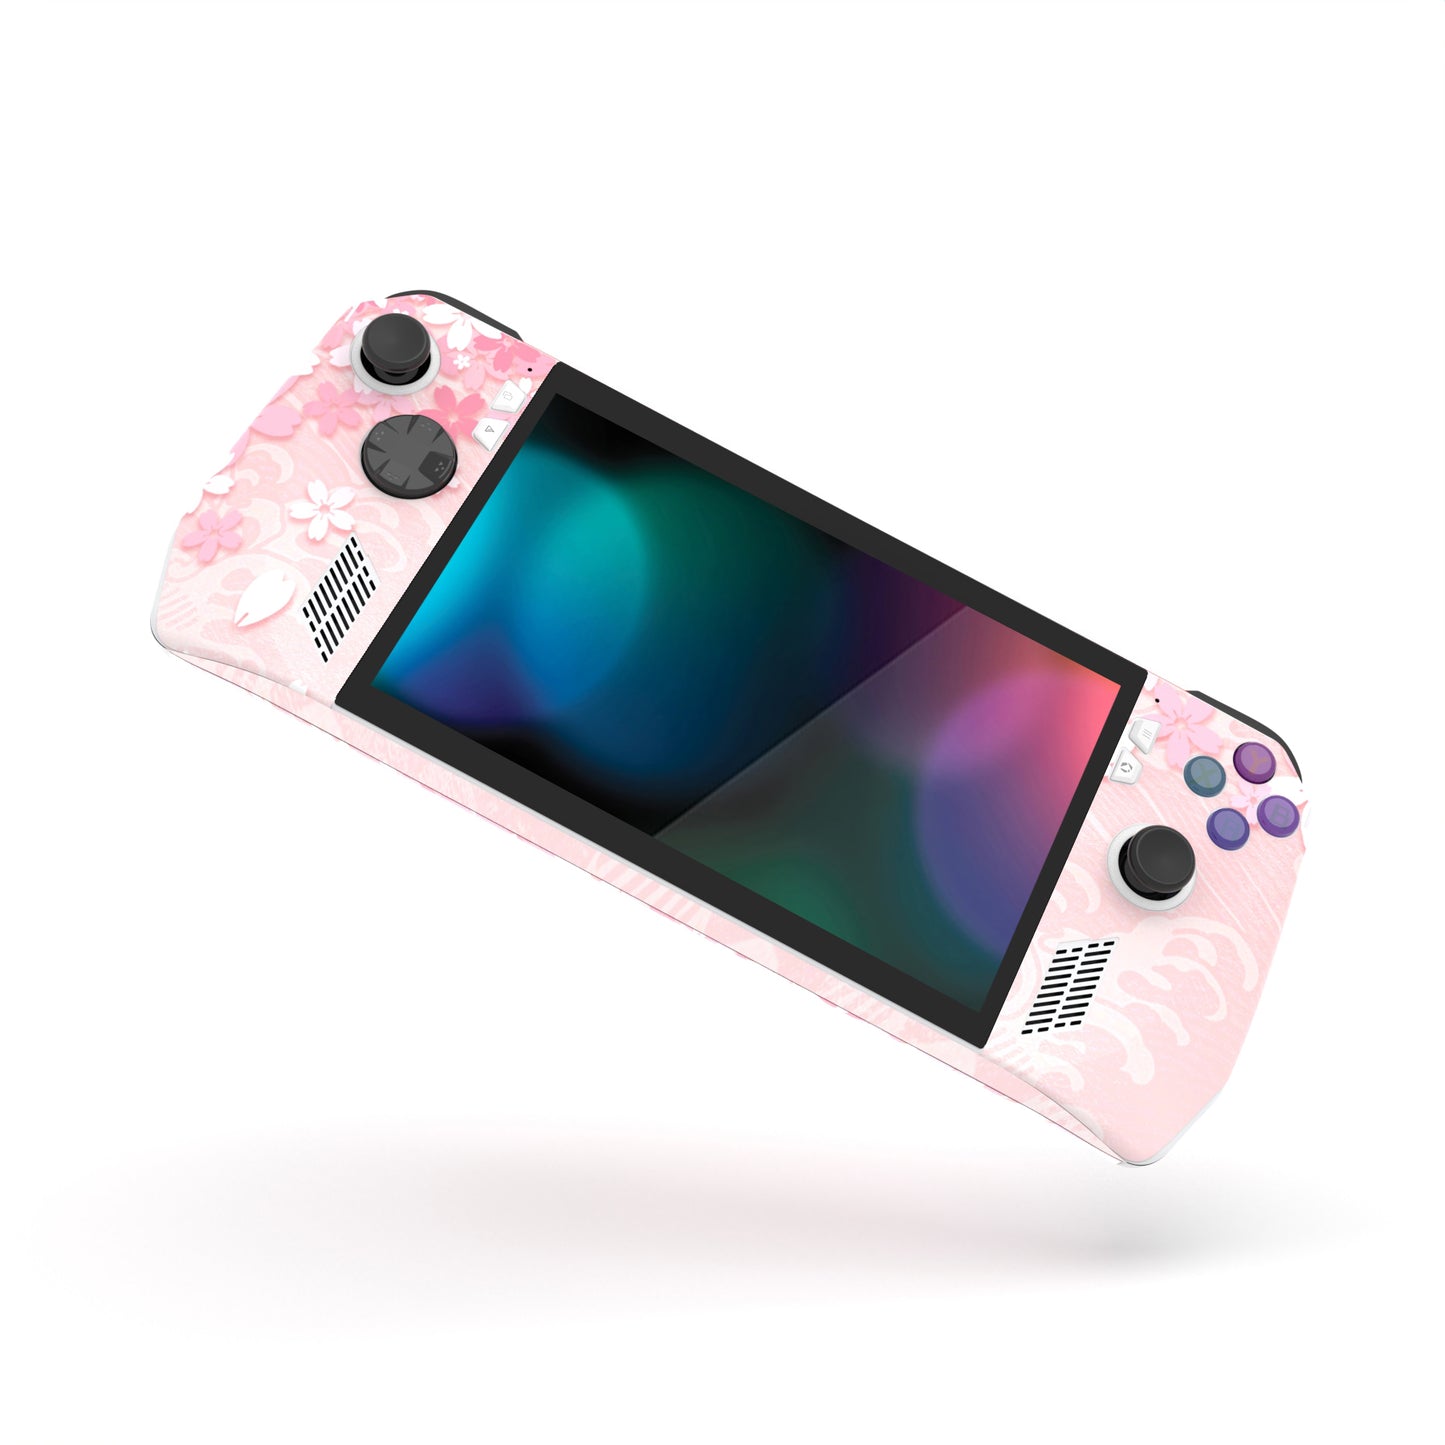 PlayVital Cherry Blossoms Petals Custom Stickers Vinyl Wraps Protective Skin Decal for ROG Ally Handheld Gaming Console - RGTM004 PlayVital